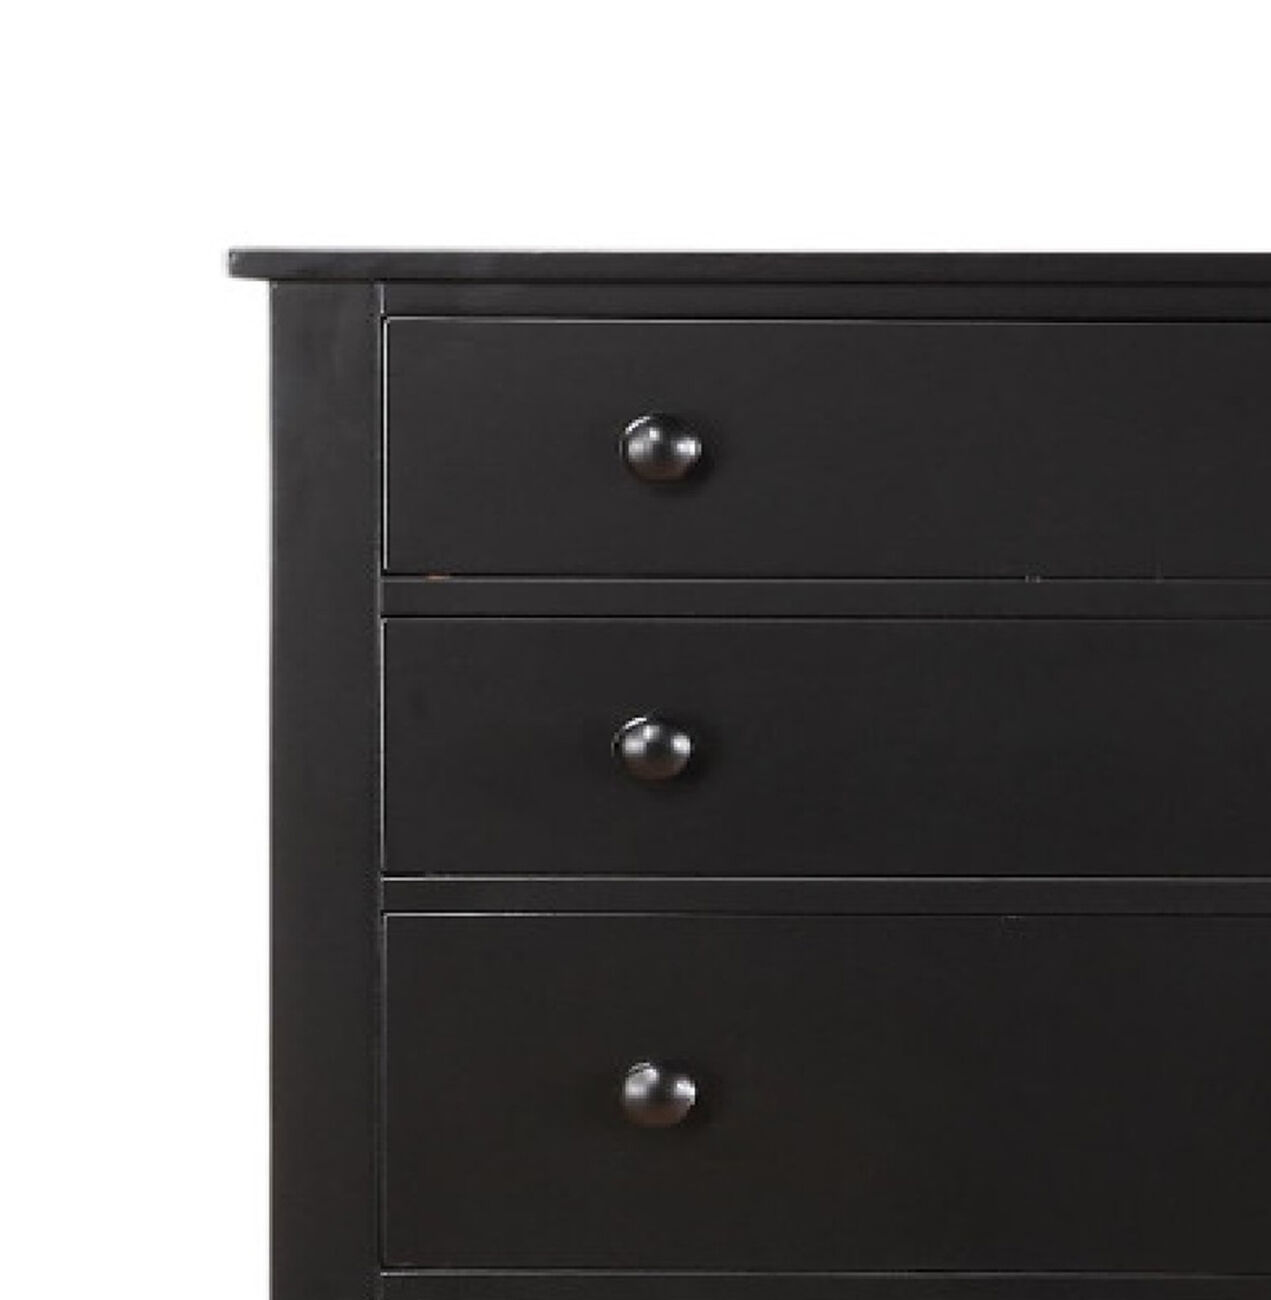 Pine Wood With Varied Size 5 Drawer Chest, Black